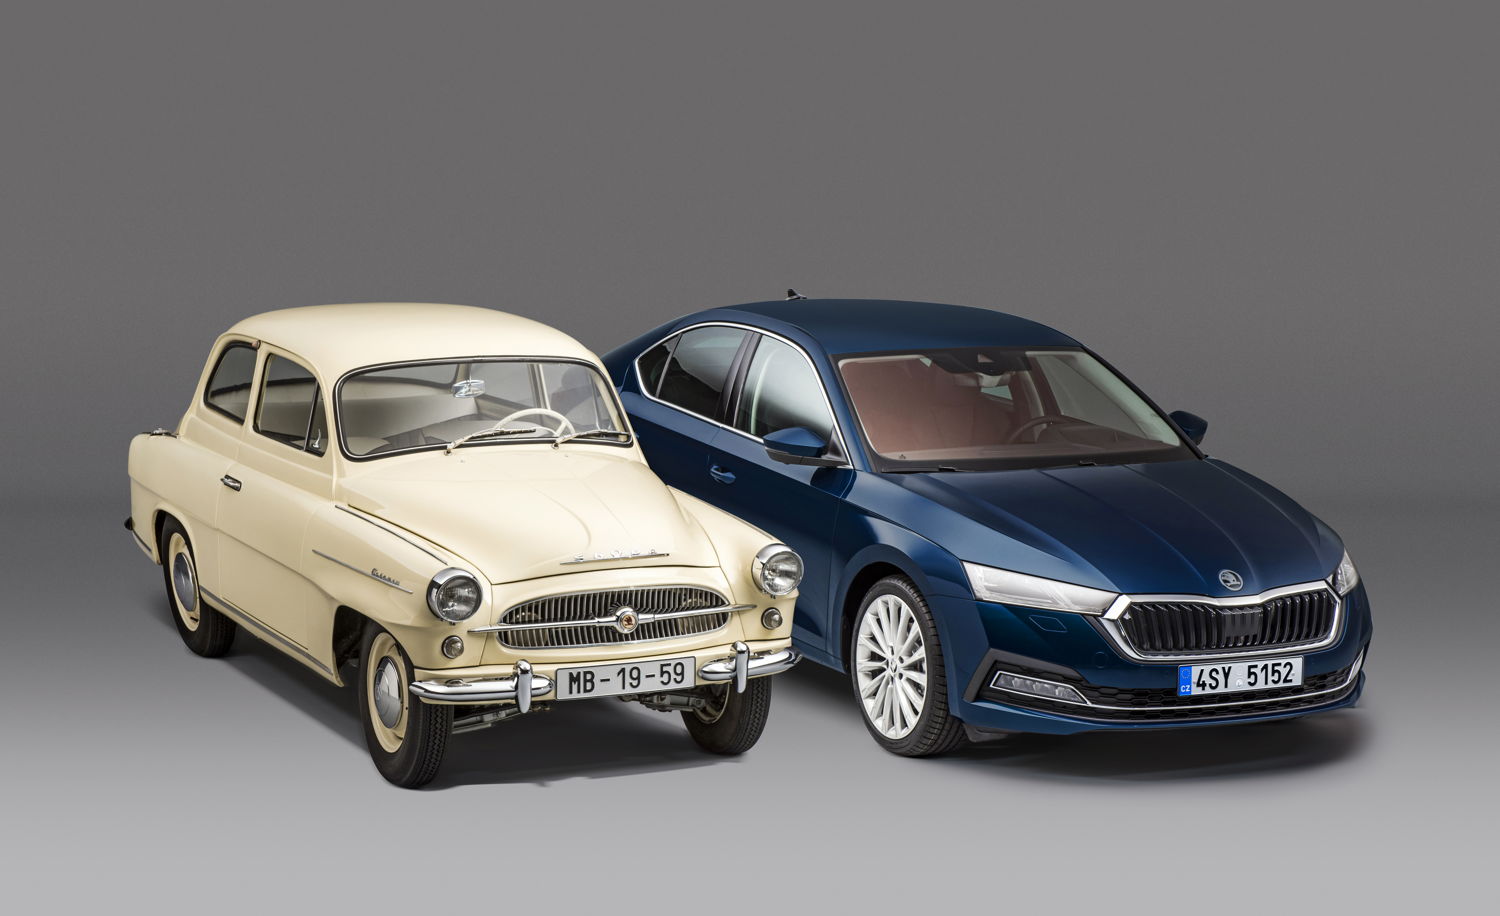 Featuring a generous amount of space and modern technology, the original OCTAVIA has been wowing customers since back in 1959. The fourth generation of the bestseller made its debut in Prague on 11 November 2019.